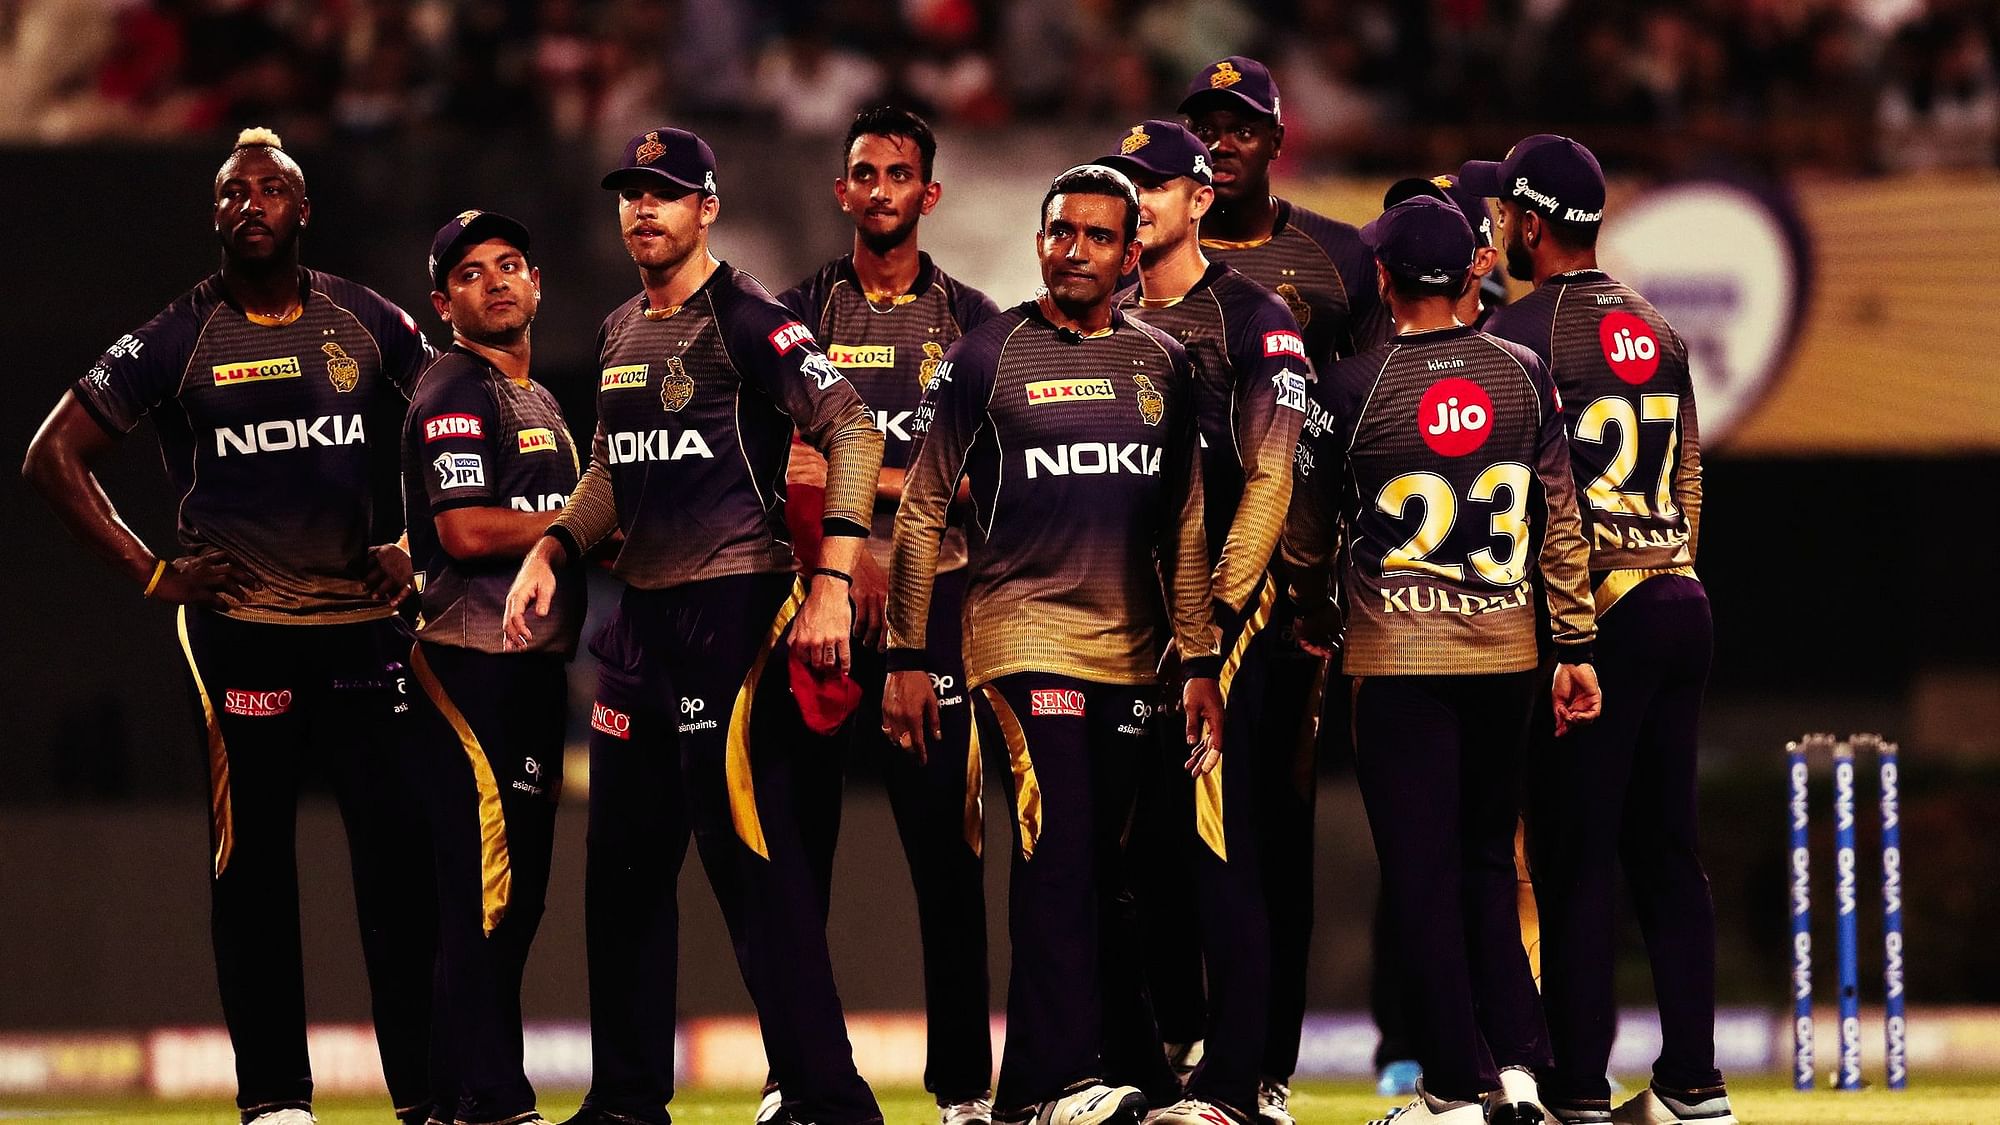 Two-time champions KKR needed to win against Mumbai Indians on Sunday to qualify for the play-offs, but they slumped to a nine-wicket thrashing.